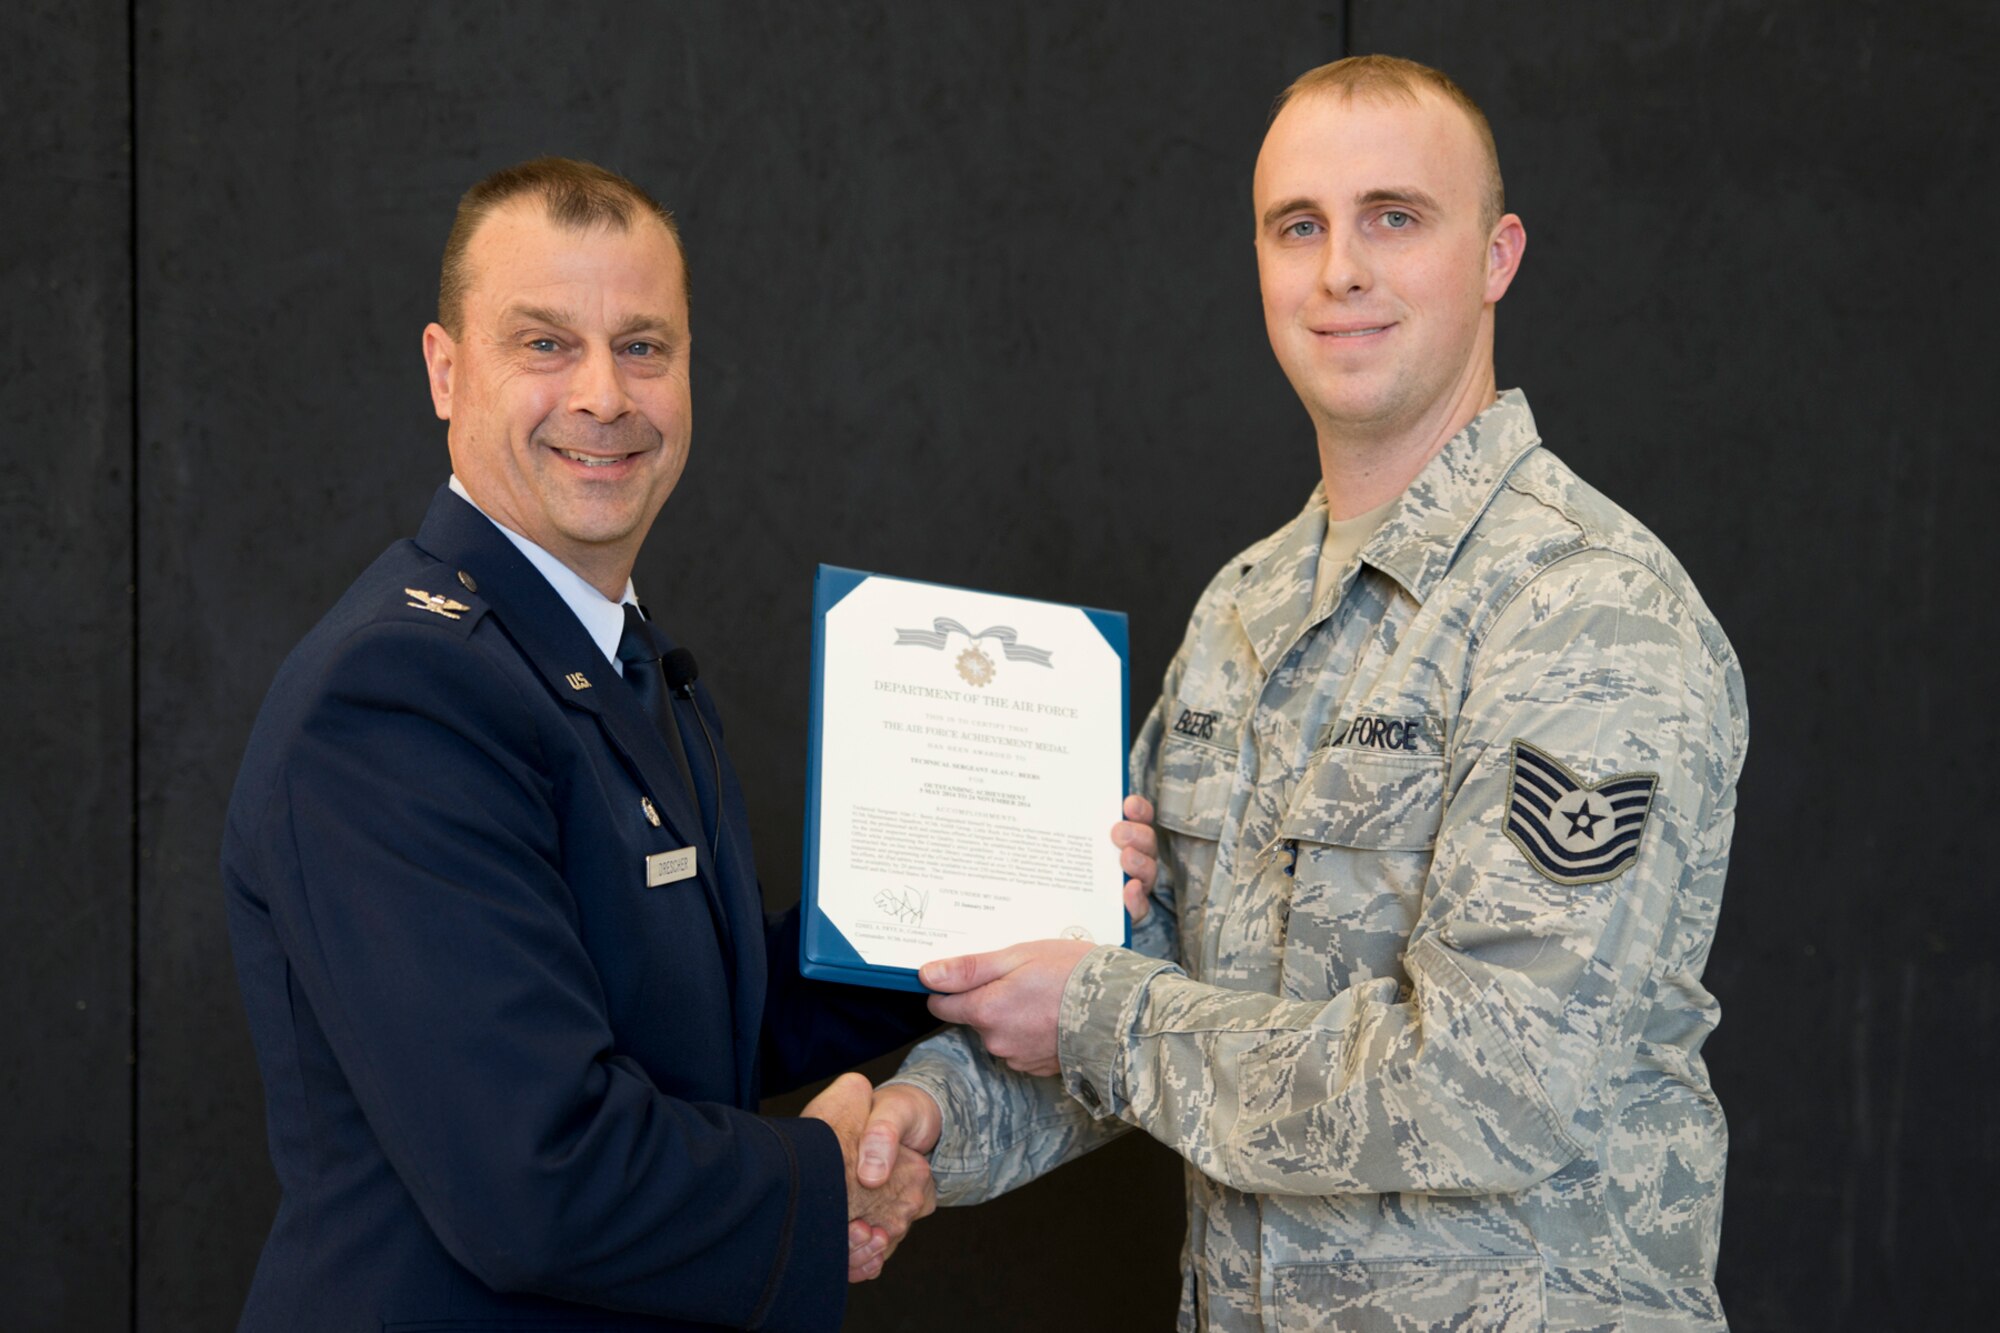 U.S. Air Force Col. Craig Drescher, commander, 913th Airlift Group, and Tech. Sgt. Alan C. Beers, quality insurance inspector, 913th Maintenance Squadron, pose for a photo during Commander’s Call at Little Rock Air Force Base, Ark., Dec. 6, 2015. Beers was awarded the Air Force Achievement Medal for outstanding achievement in his field from 5 May 2014 to 24 November 2014. Colonel Drescher also recognized 24 additional Airmen for personal achievements. (U.S. Air Force photo by Master Sgt. Jeff Walston/Released) 